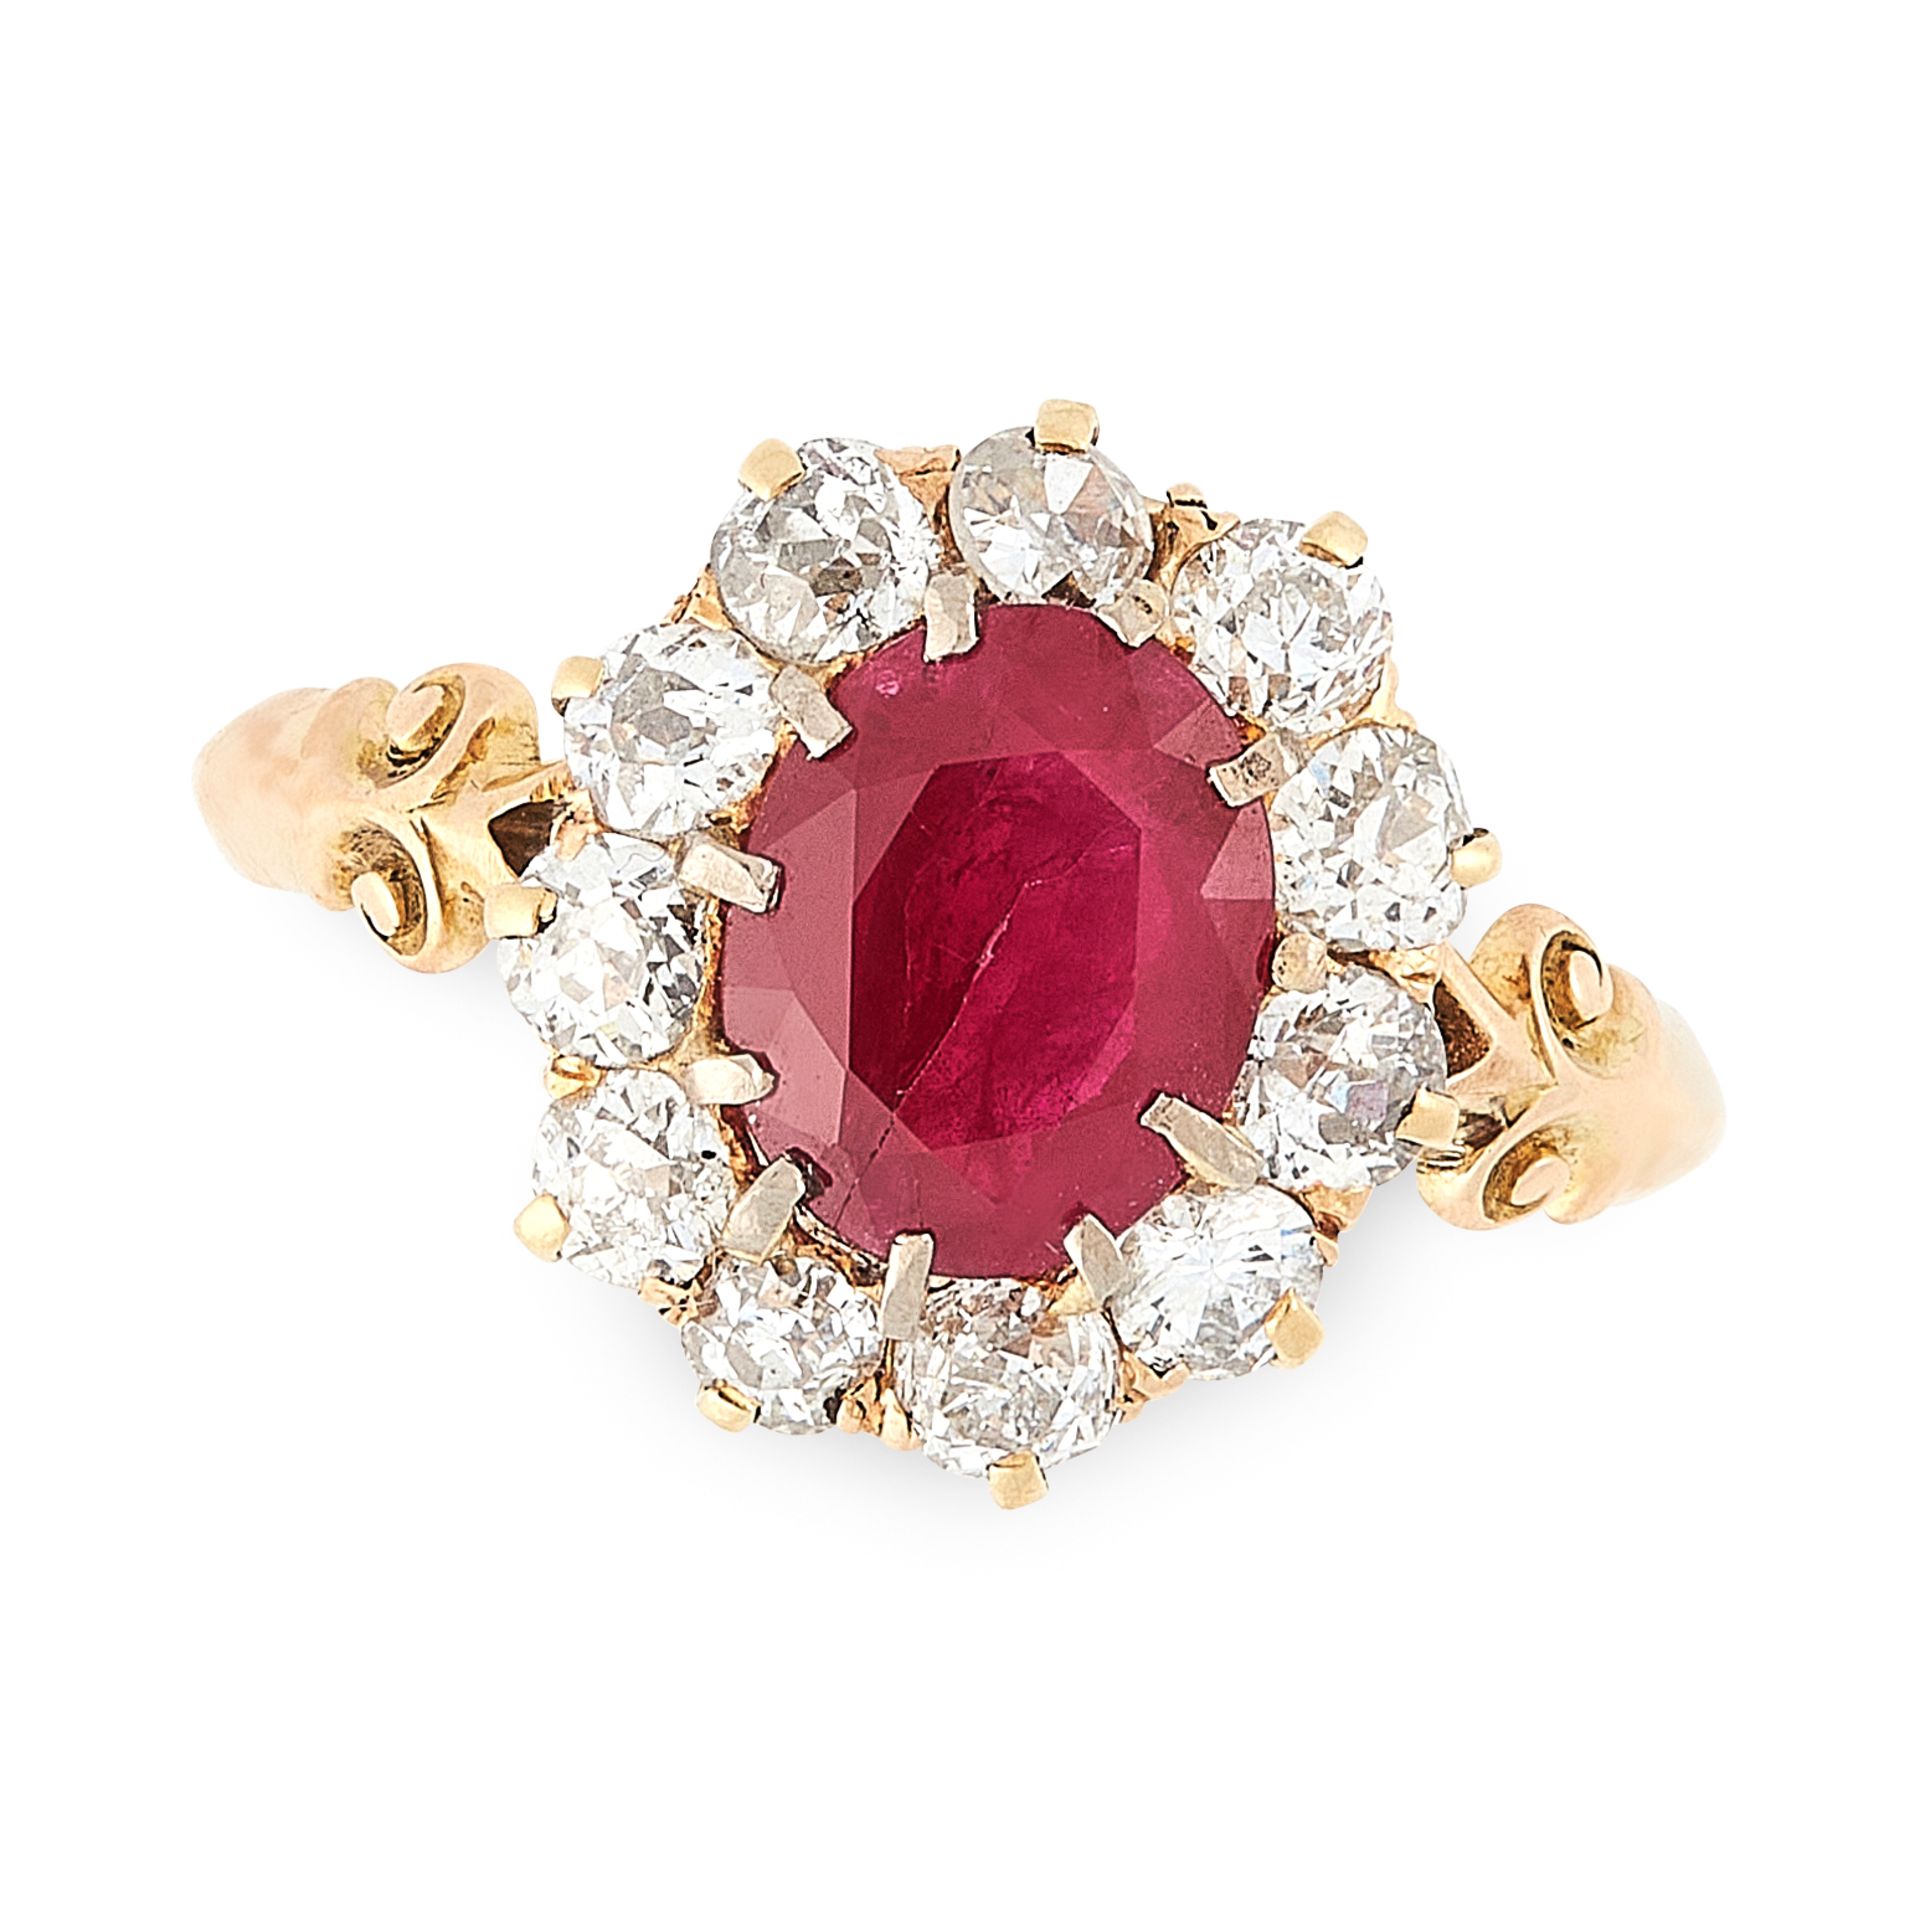 AN ANTIQUE BURMA NO HEAT RUBY AND DIAMOND CLUSTER RING in high carat yellow gold, set with an oval